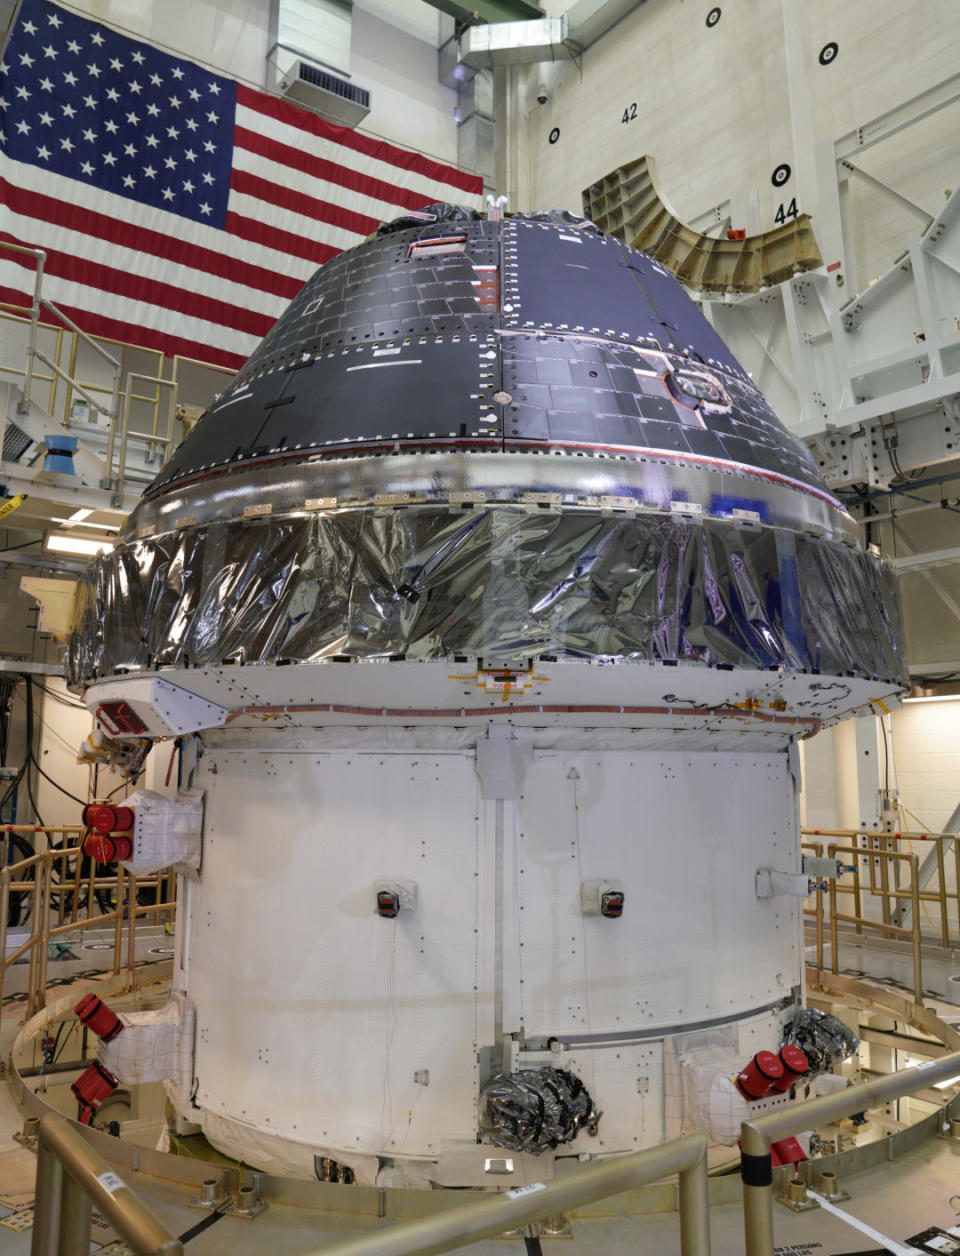 The completed Orion spacecraft crewe module stacked on top of the completed service module in the Operations and Checkout Building at the NASA Kennedy Space Center.                                